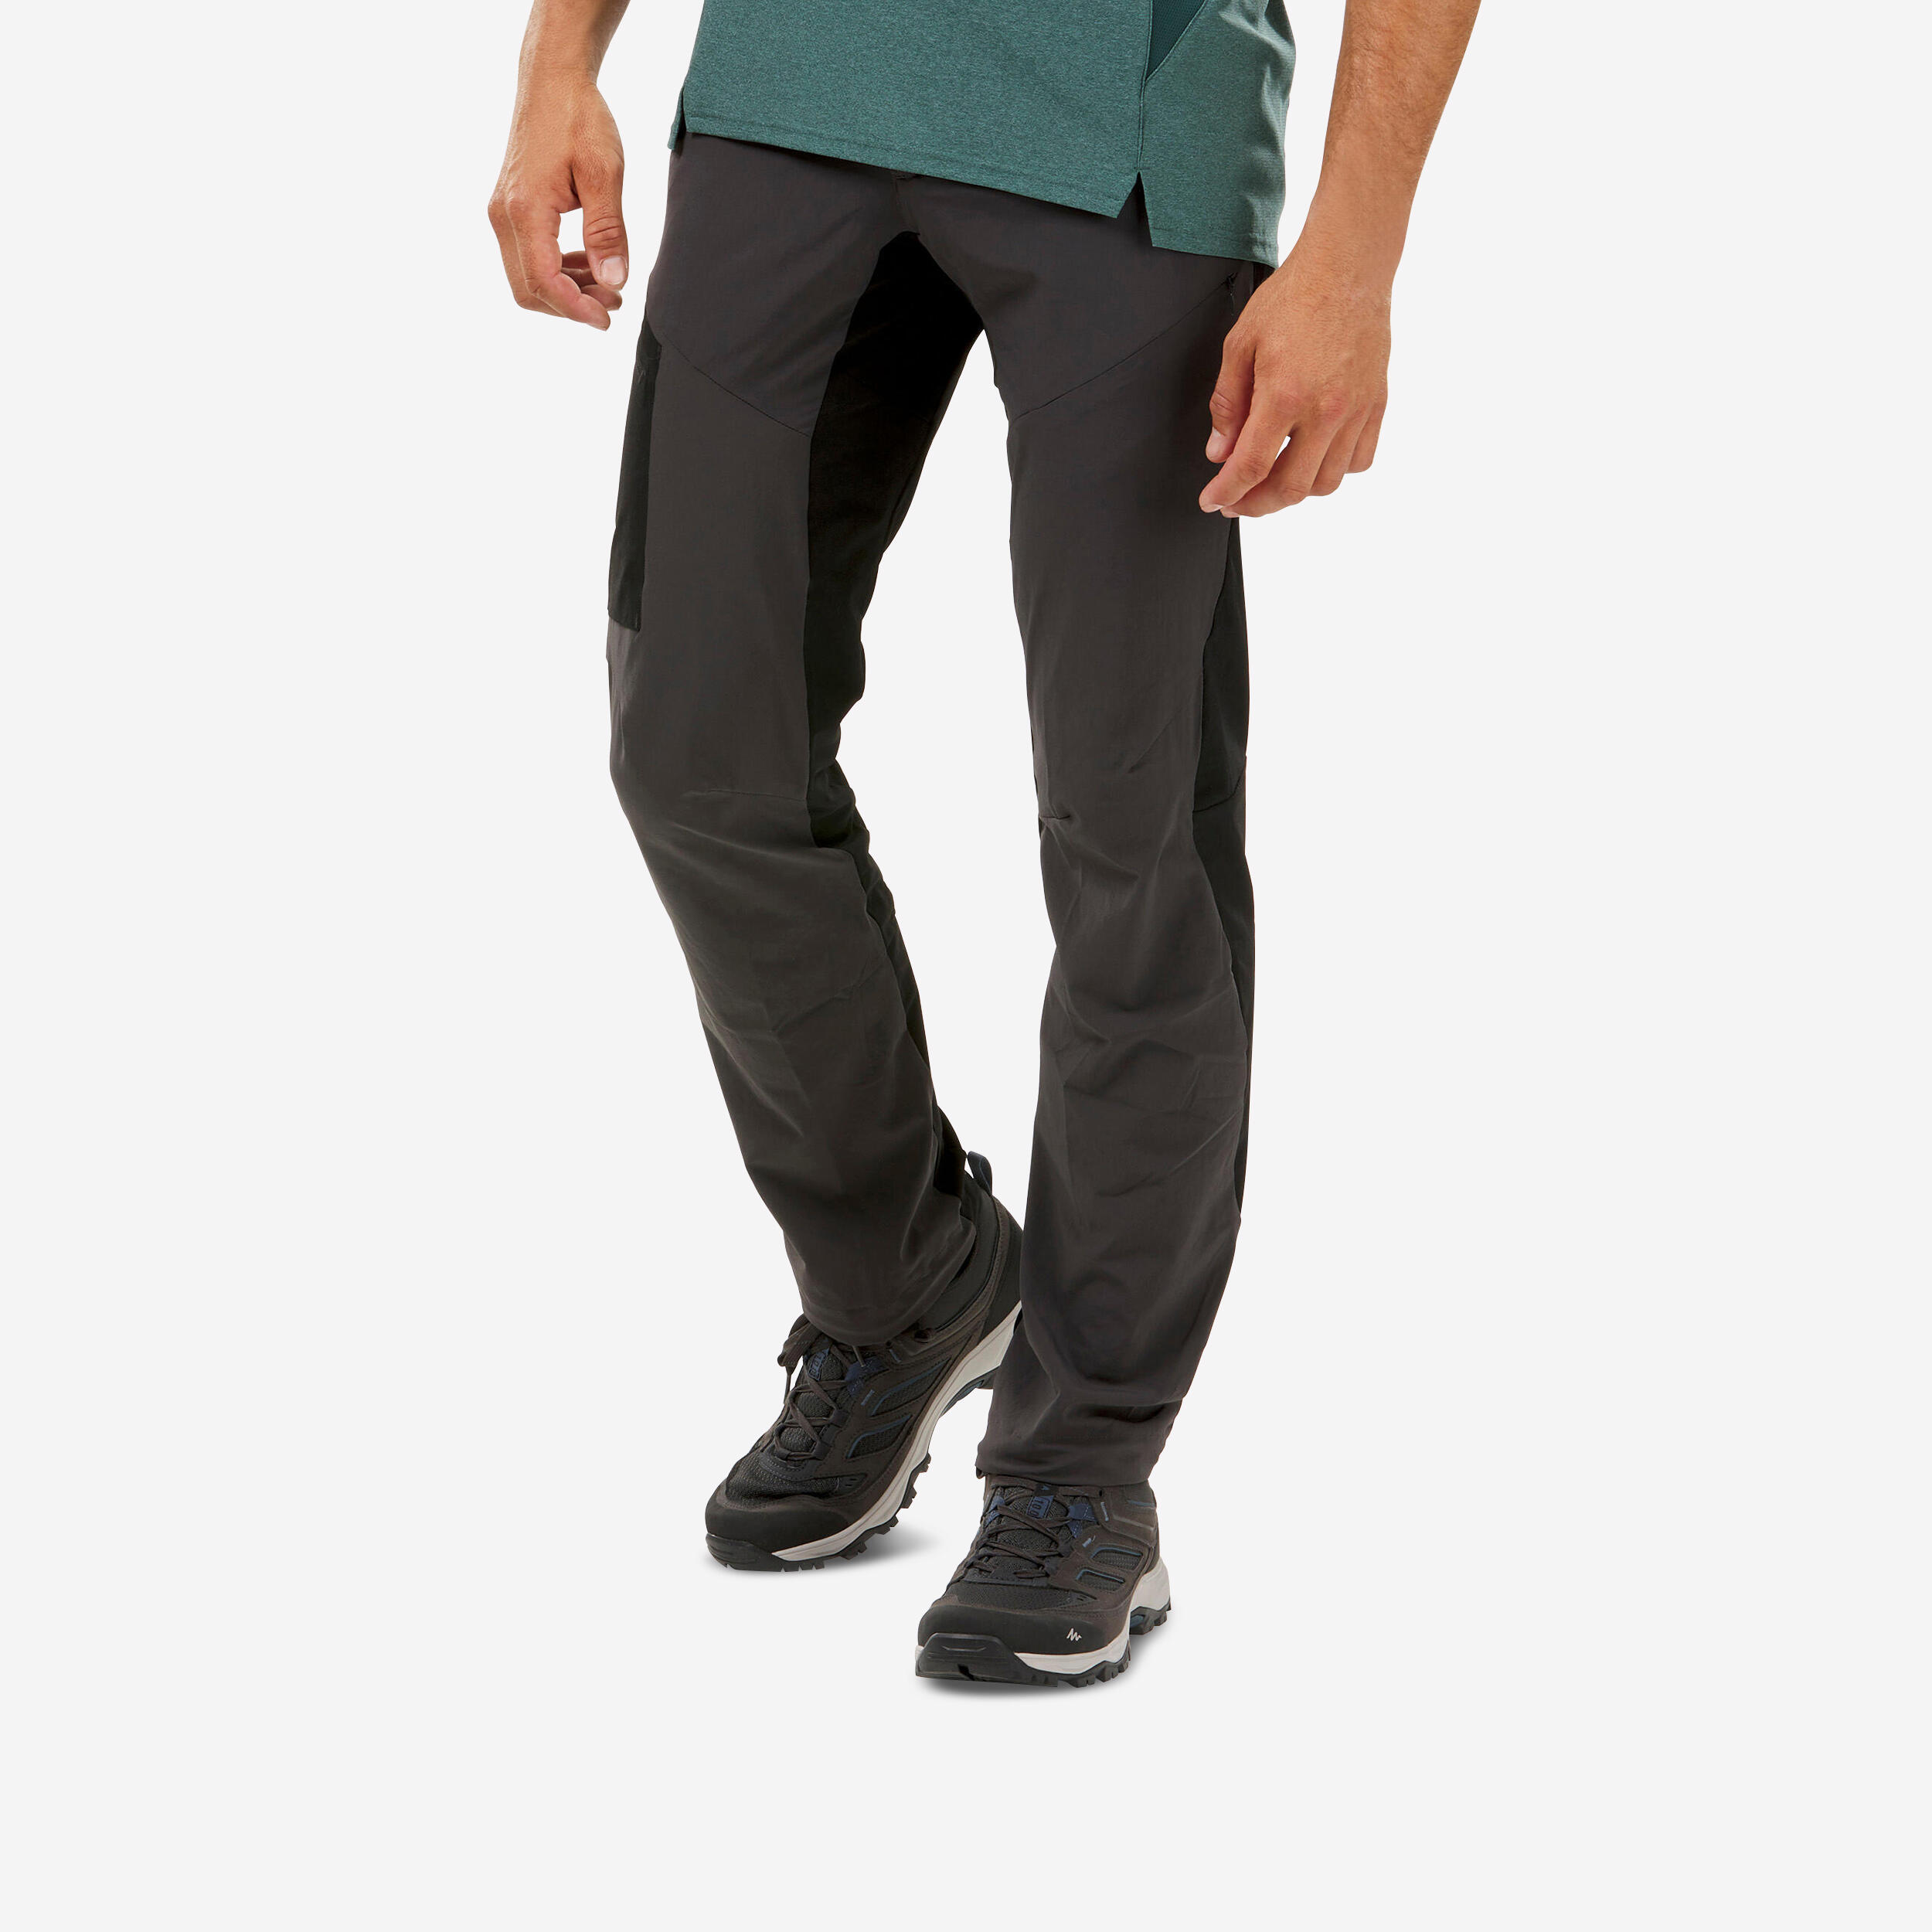 Convertible Hiking Pants with Belt| Free Soldier